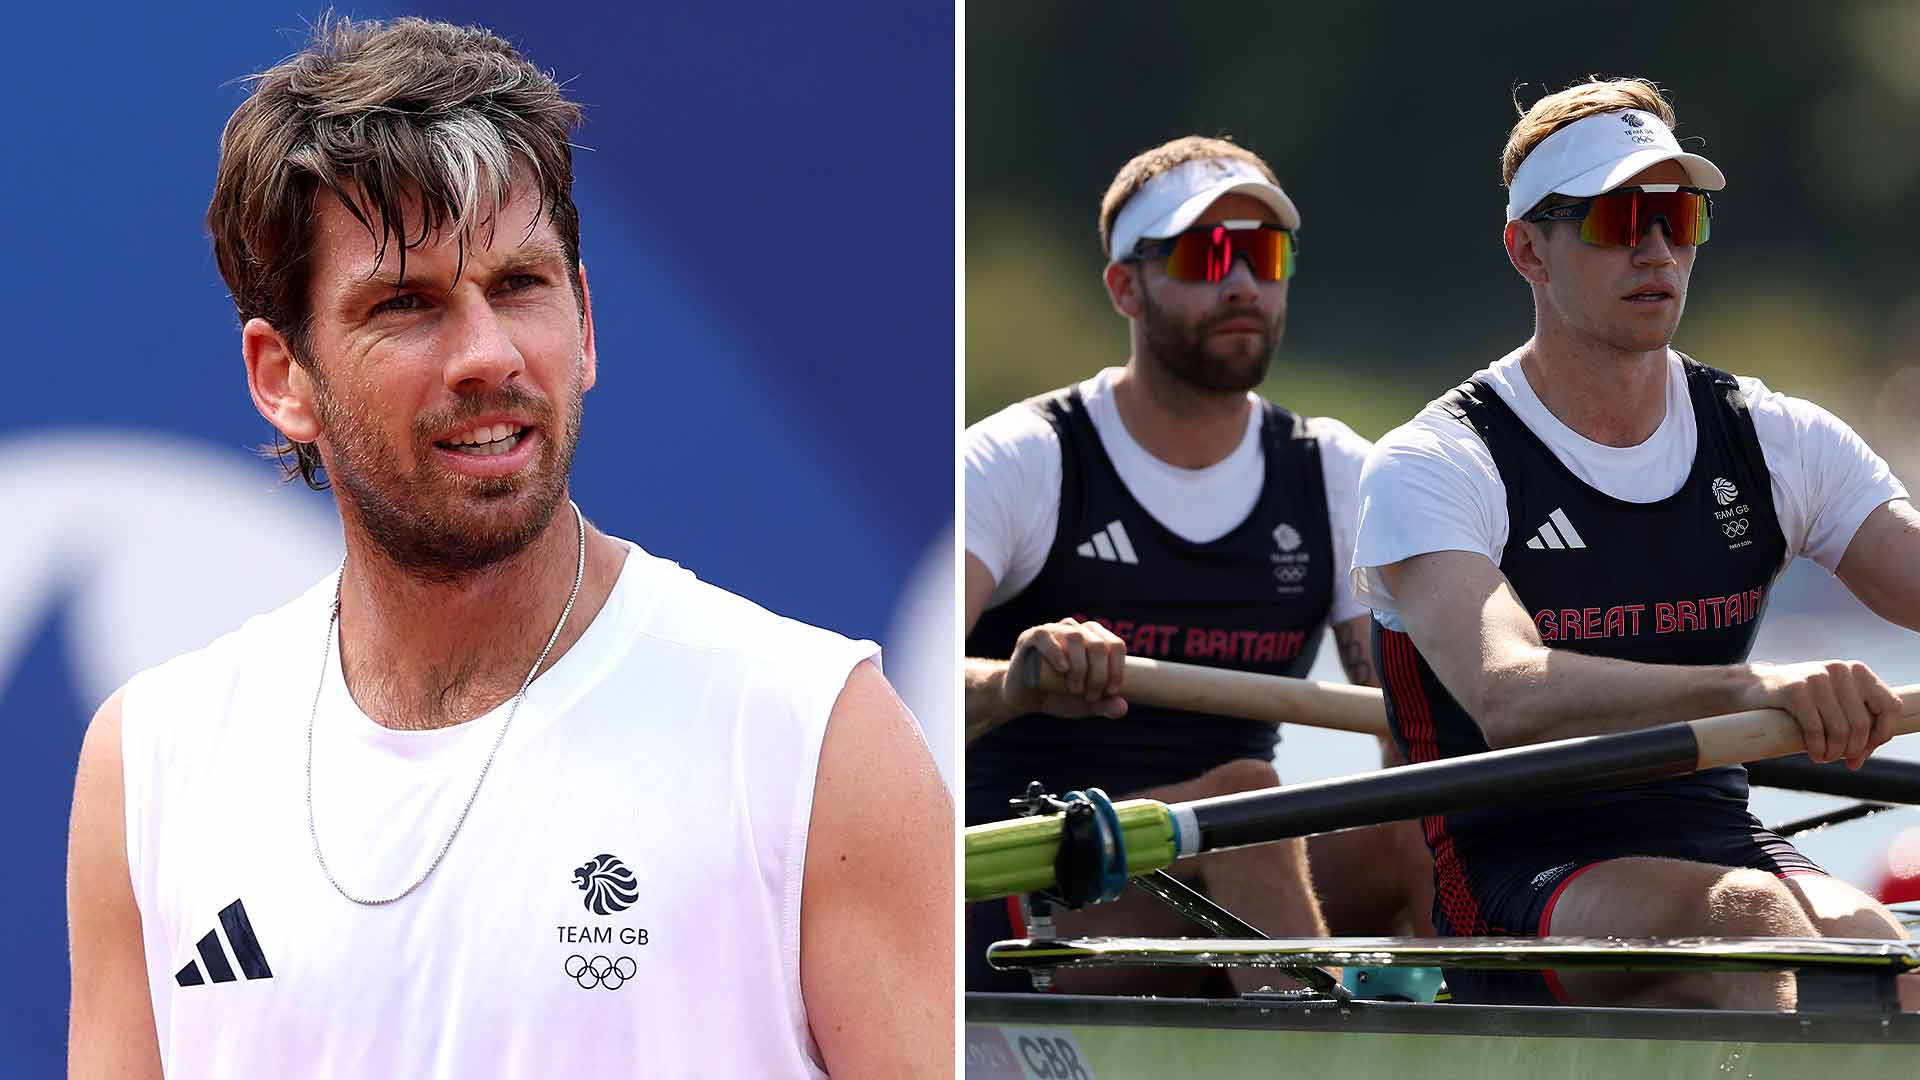 Cameron Norrie watched a lot of Olympic rowing growing up.